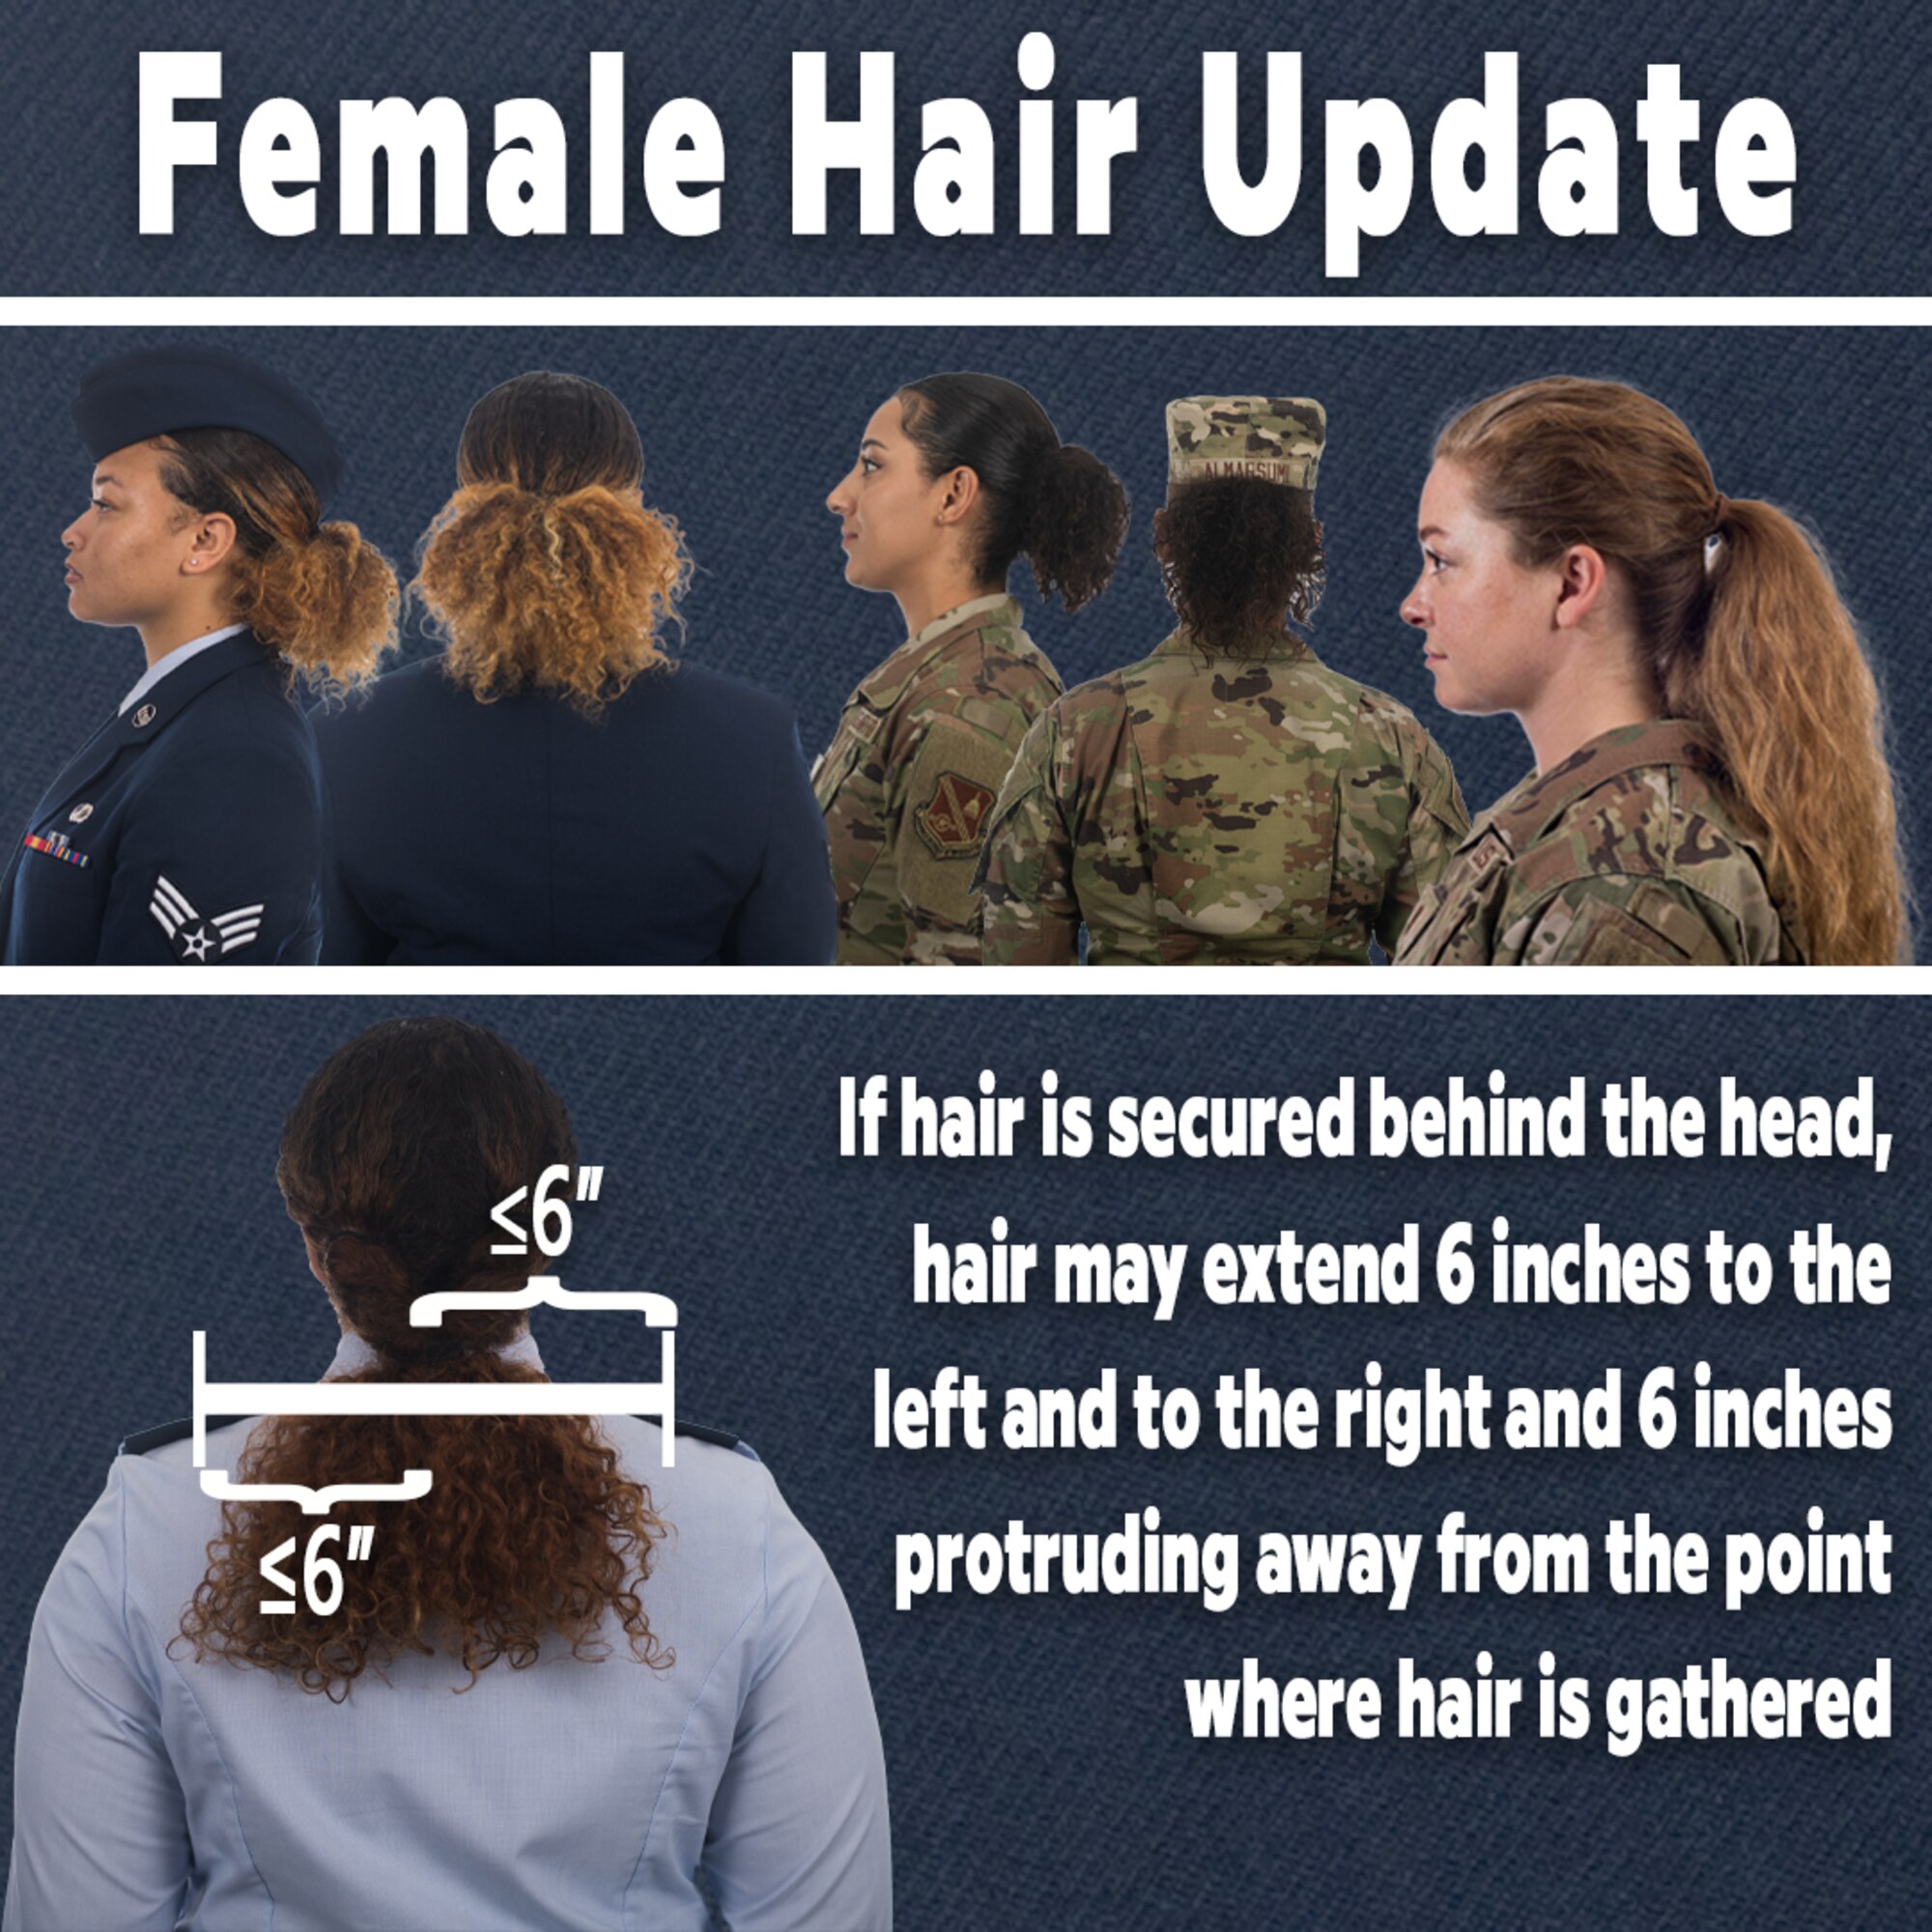 The Air Force revises Air Force Instruction 36-2903 to address differences in hair density and texture June 25, 2021. When hair is secured behind the head, the hair may extend six inches to the left and to the right and six inches protruding from the point where the hair is gathered. The 12-inch total width must allow for proper wear of headgear. (U.S. Air Force graphic)